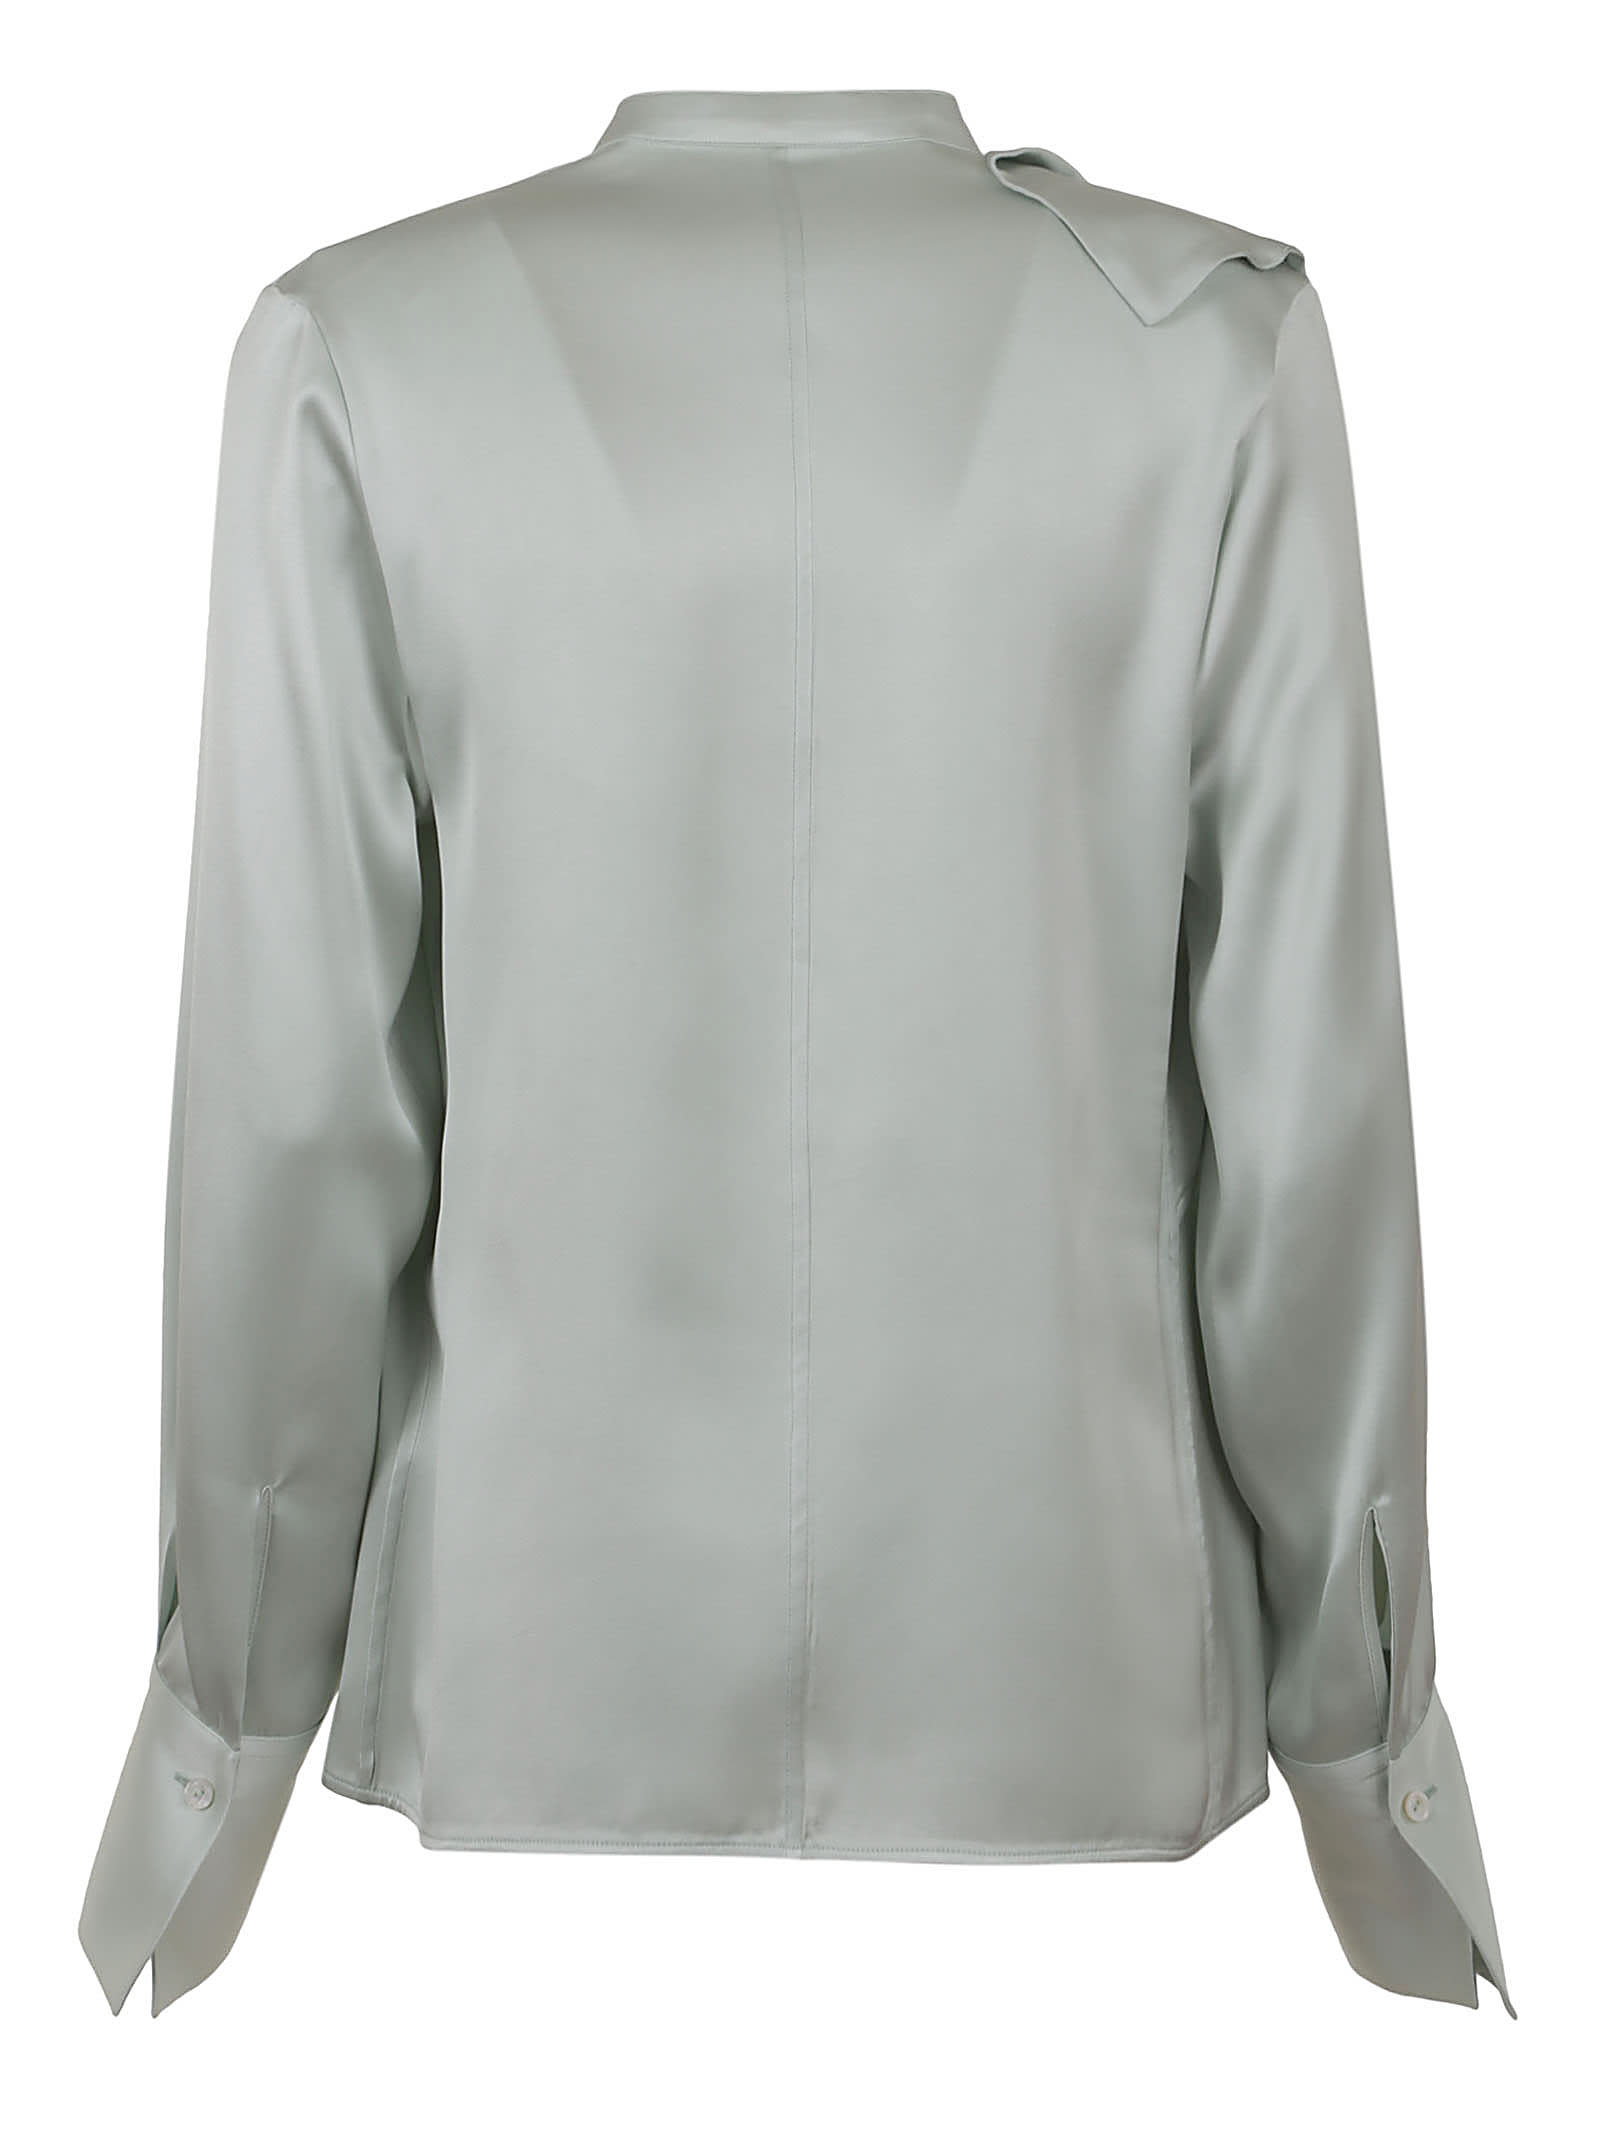 Shop Jil Sander Fitted Blouse With Stand Collar, Draped Front.